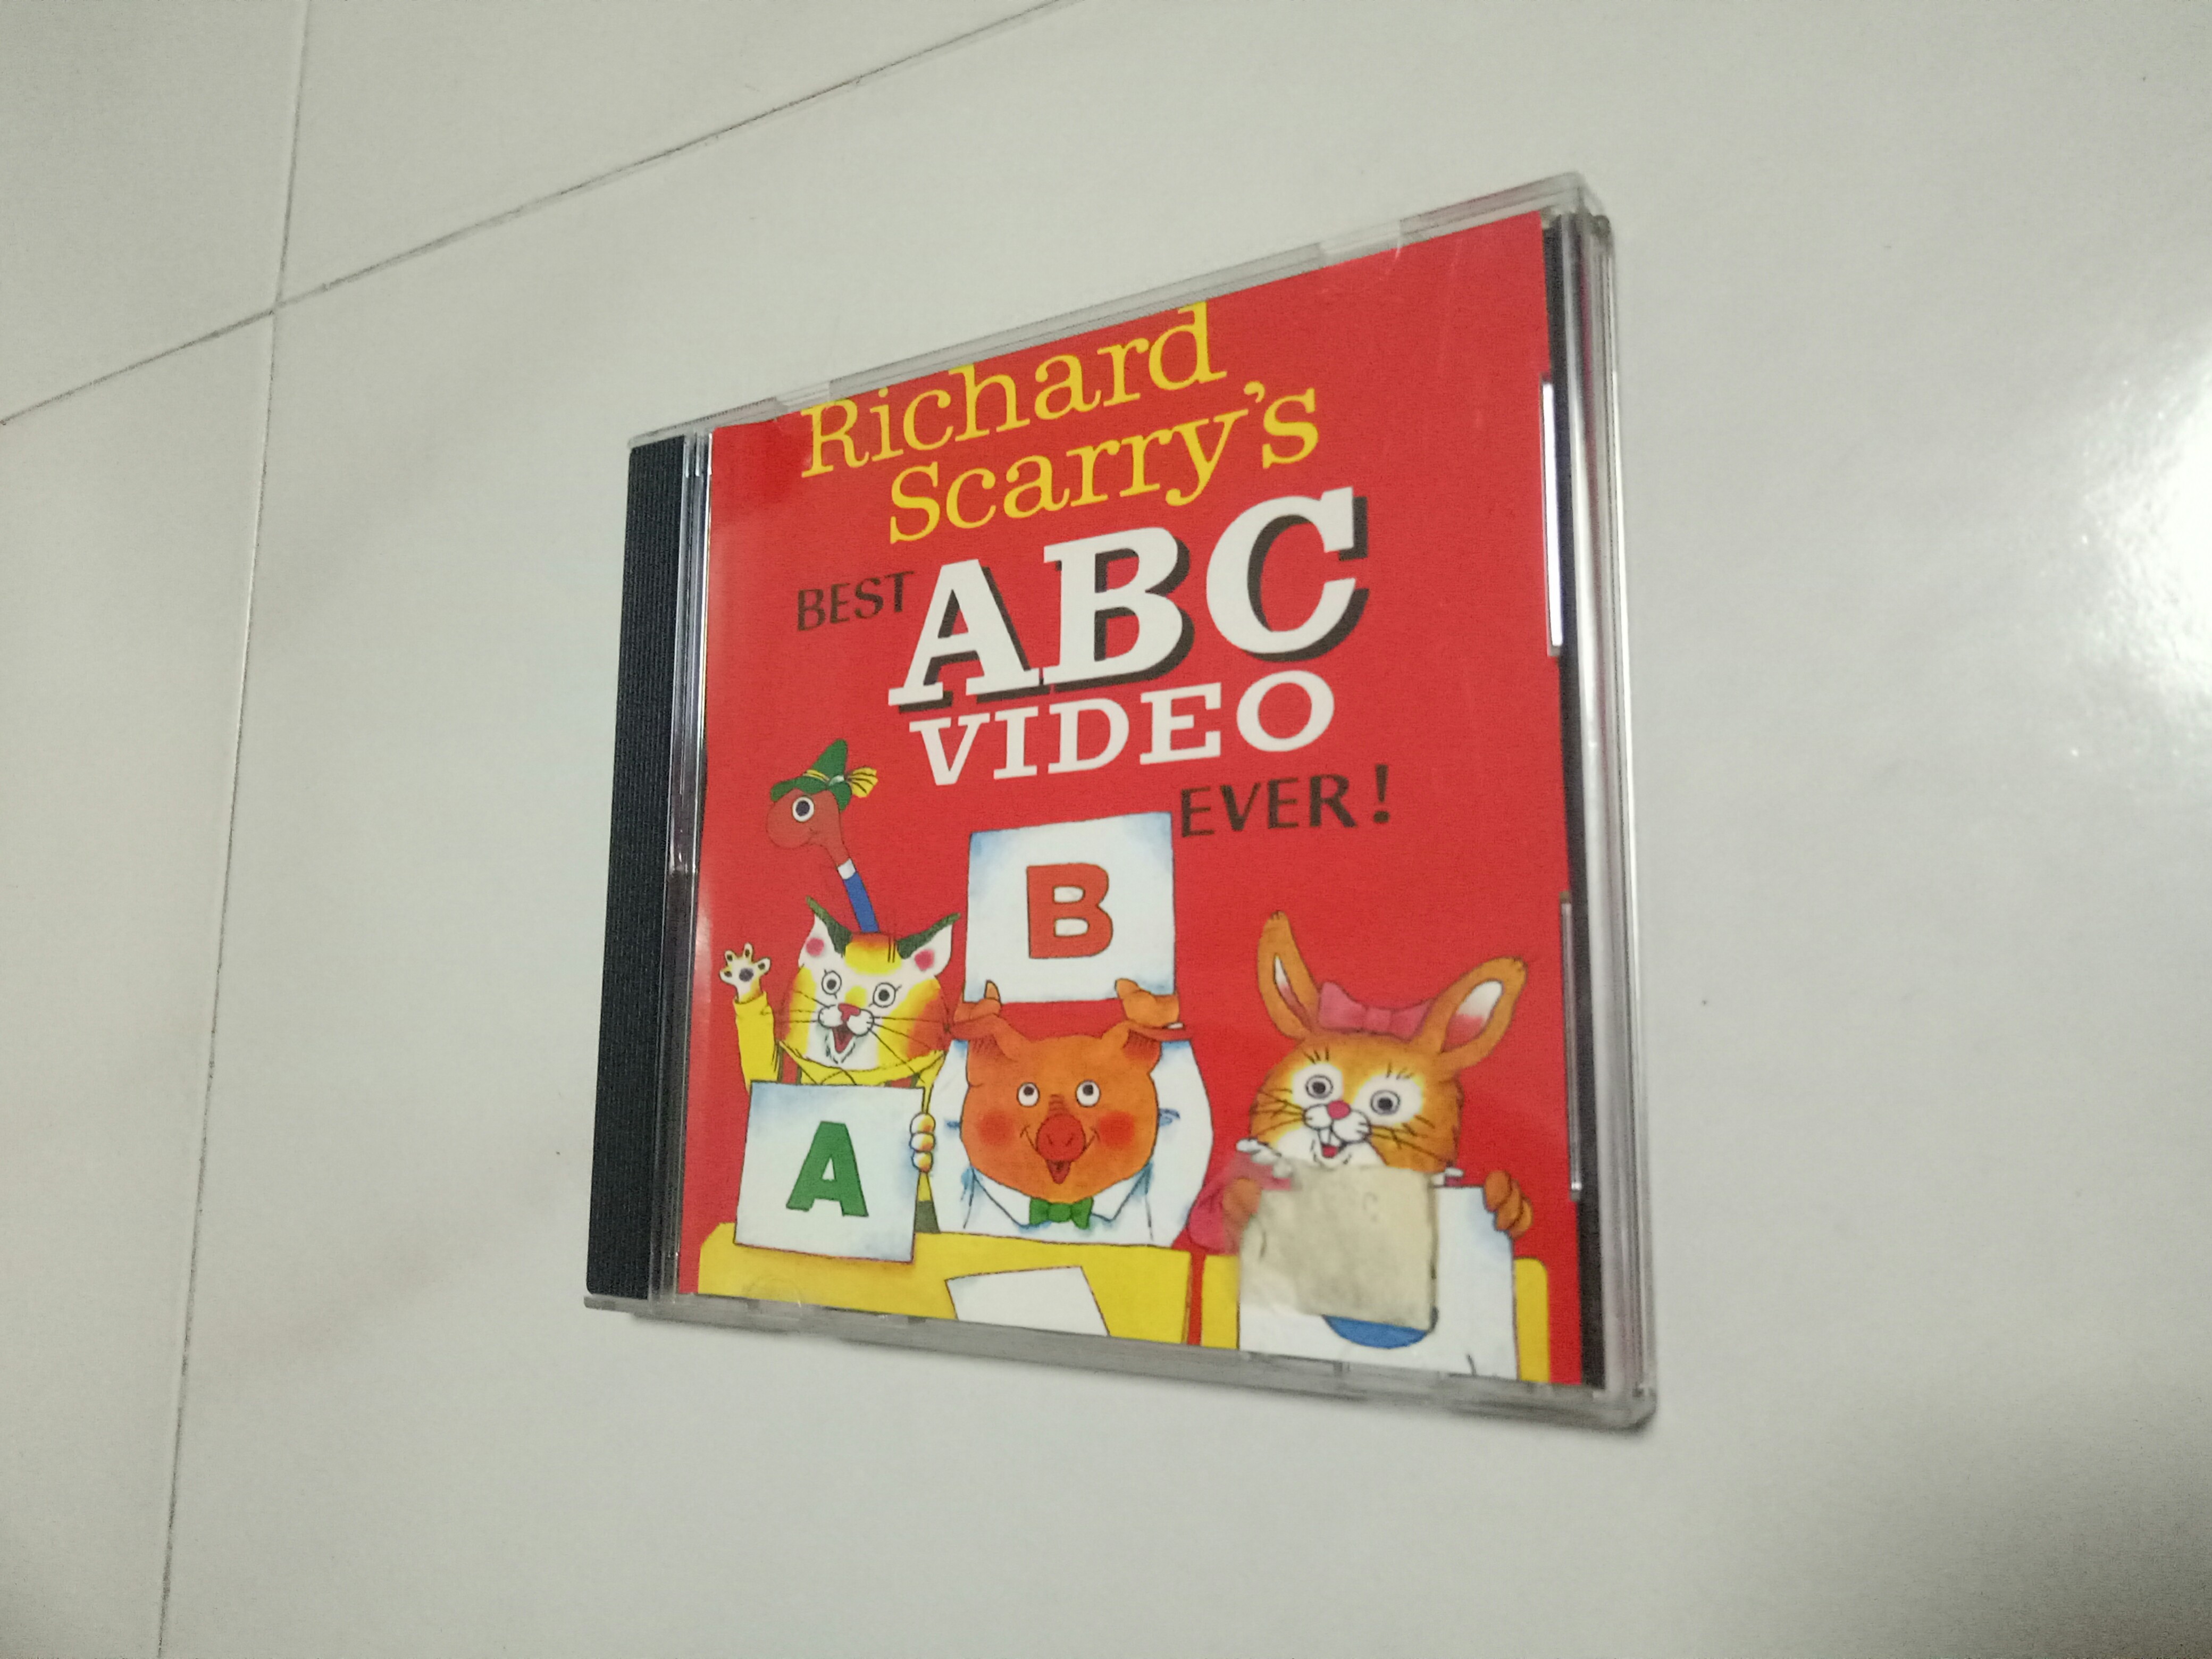 Richard Scarry Best ABC video ever